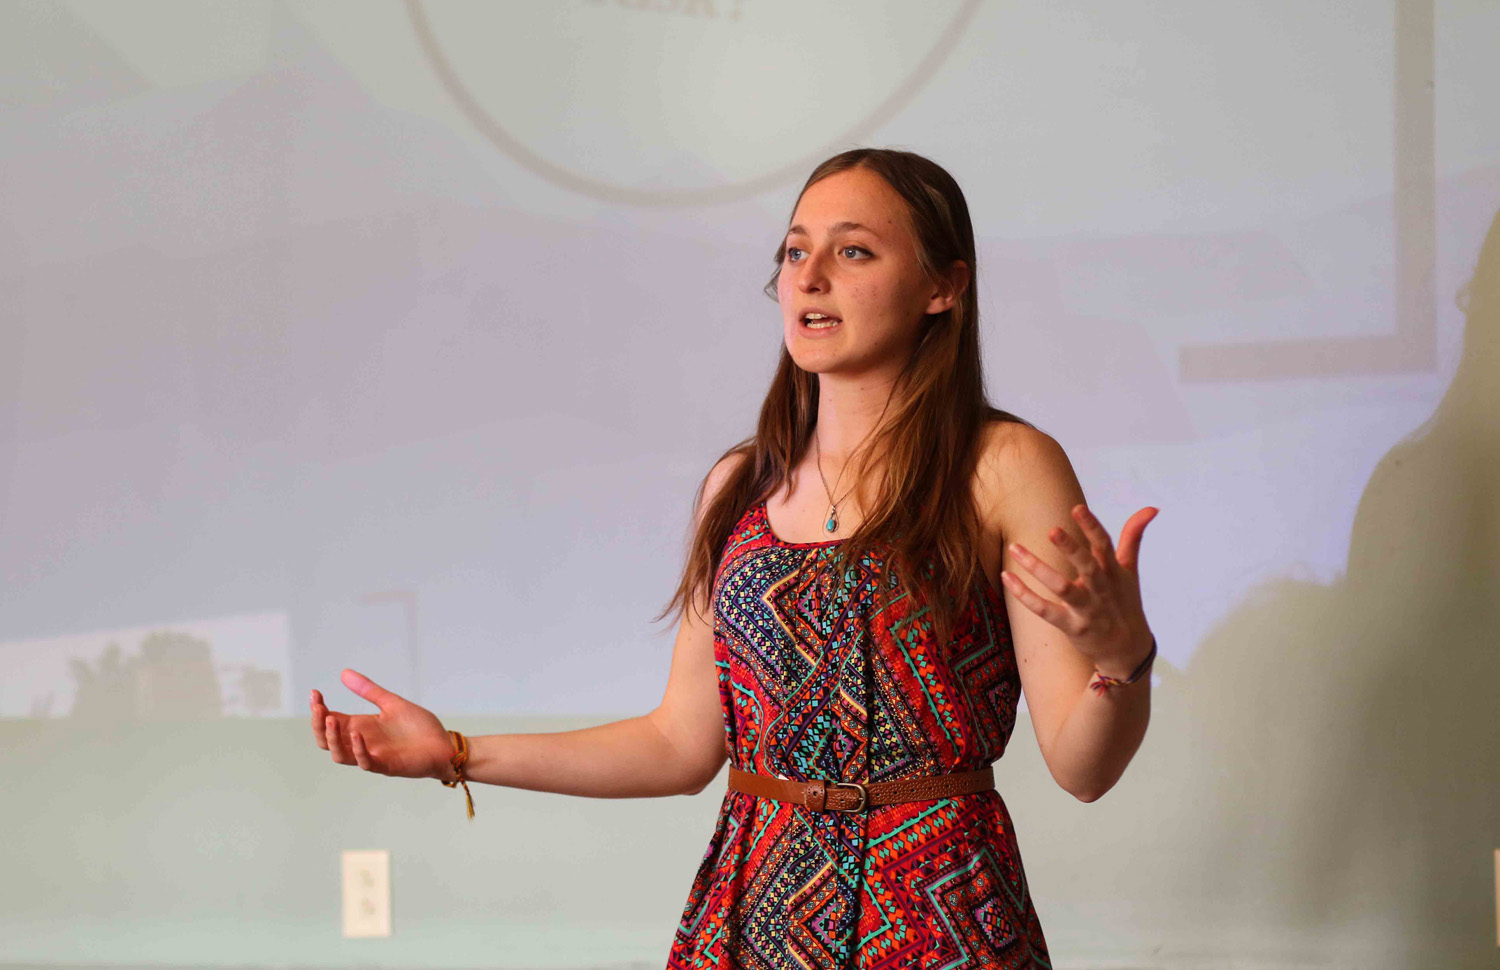 Kate Cullen '16 spoke on "A Melting Antarctica: What is Our Environmental and Social Risk?"